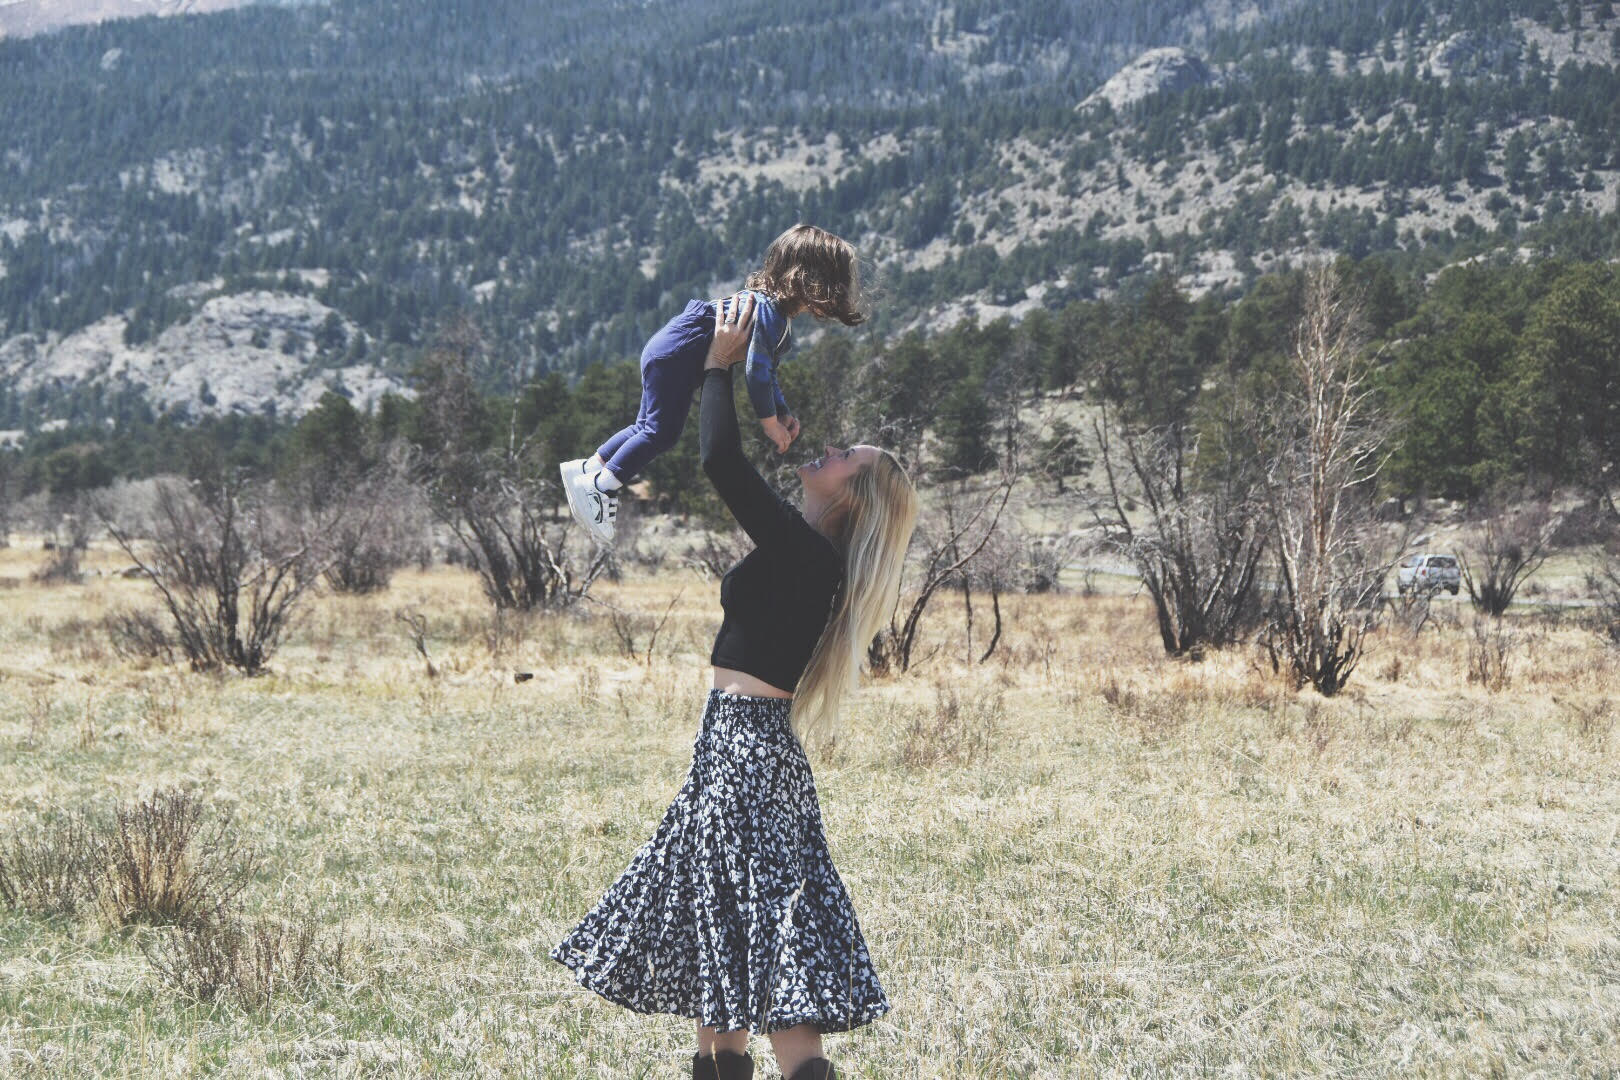 Mama and Child dance in front of mountains